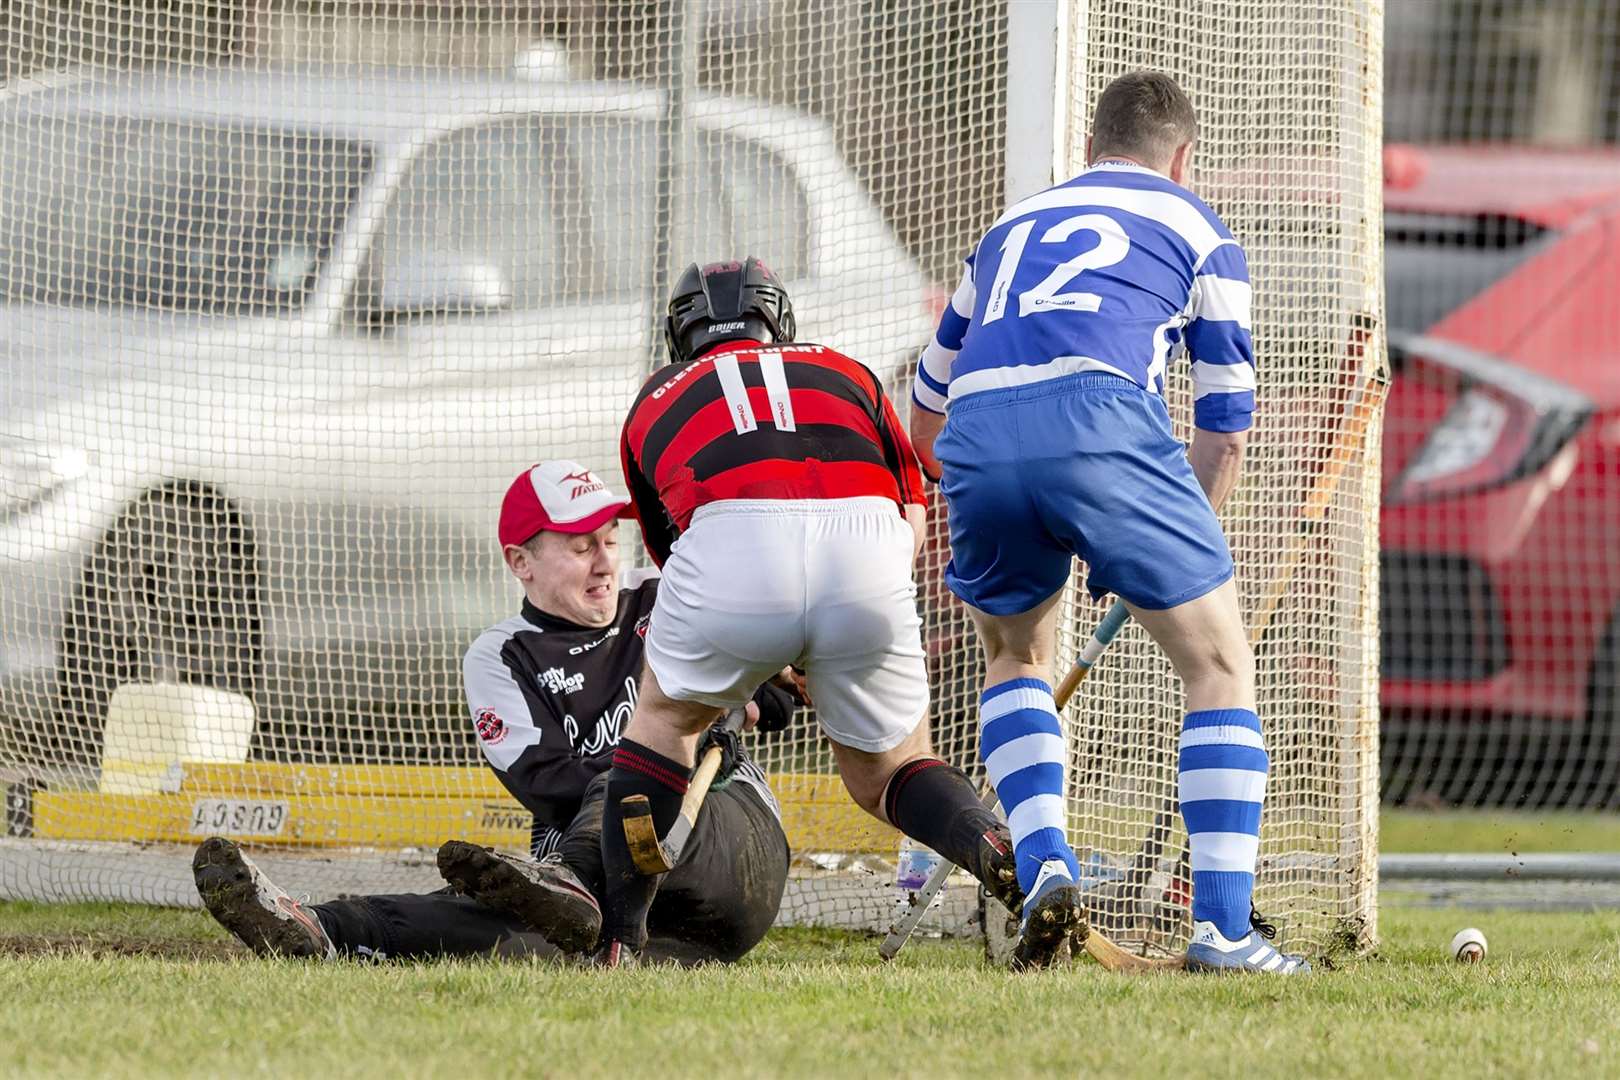 Shinty game between Glen Urquhart and Newtonmore played at Blairbeg in Drumnadrochit. The club has secured a 99 year lease on the ground.